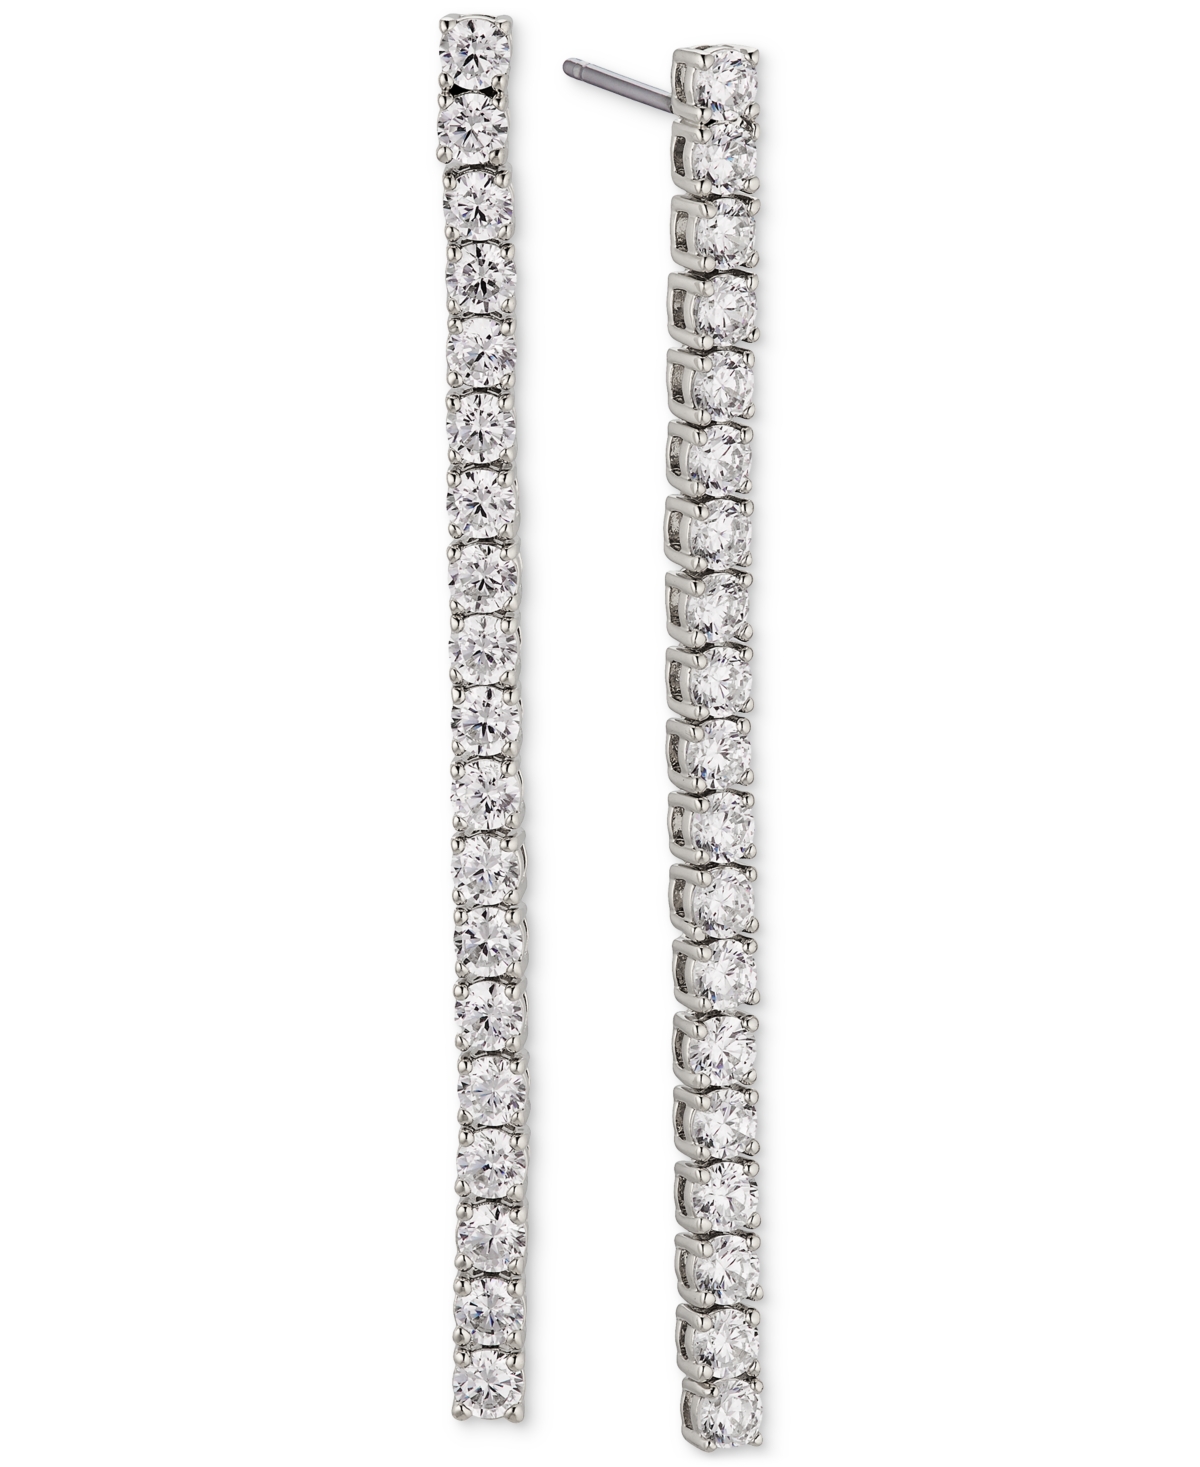 Silver-Tone Cubic Zirconia Linear Drop Earrings, Created for Macy's - Rhodium